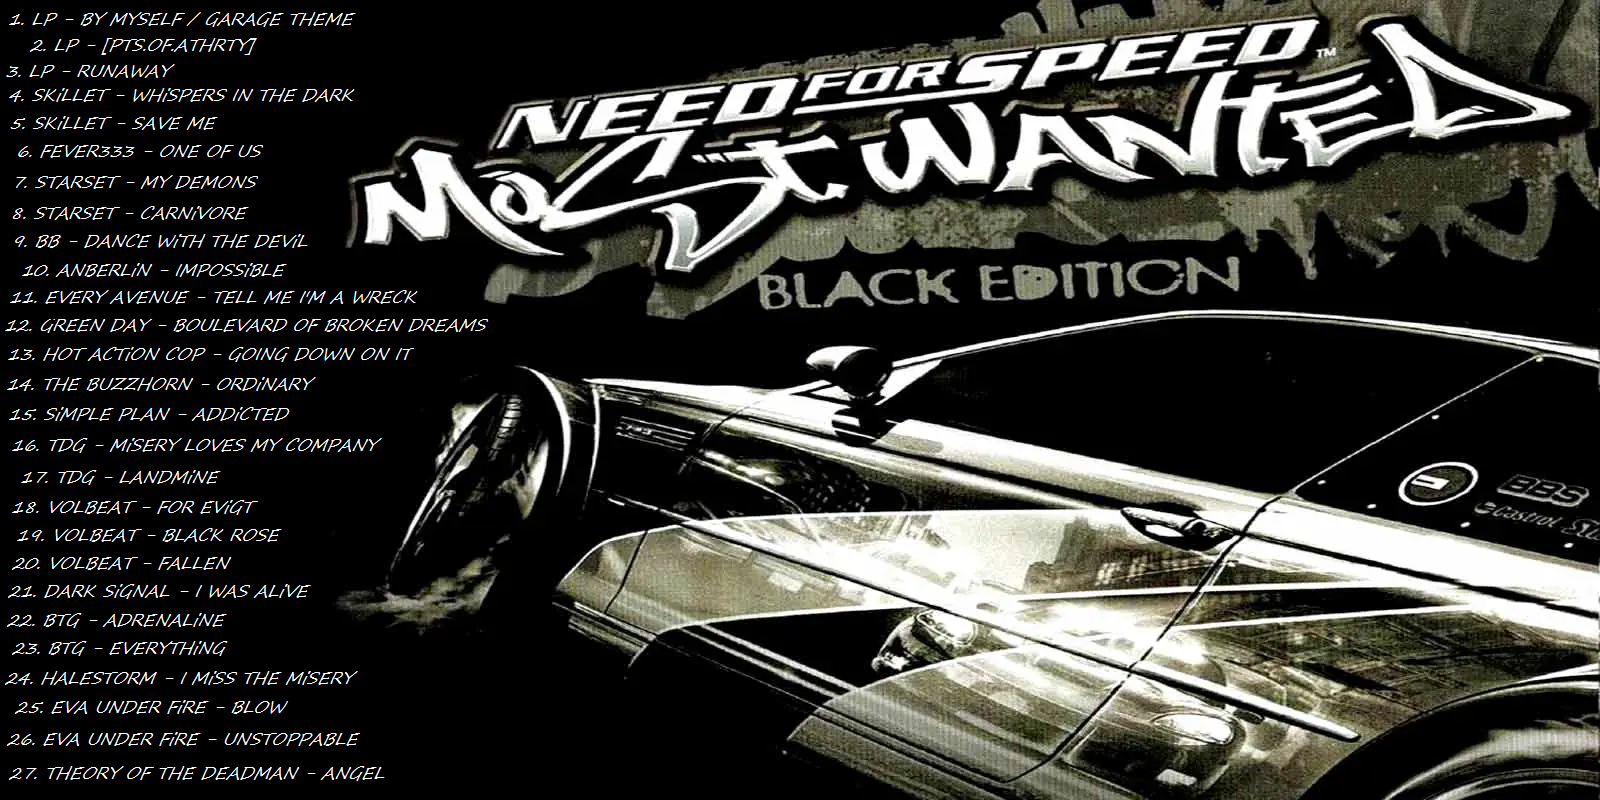 Most wanted текст. NFS most wanted 2005 диск. Диск нид фор СПИД мост вантед 2005. Постер нфс мост вантед 2005. Need for Speed most wanted Black Edition диск.